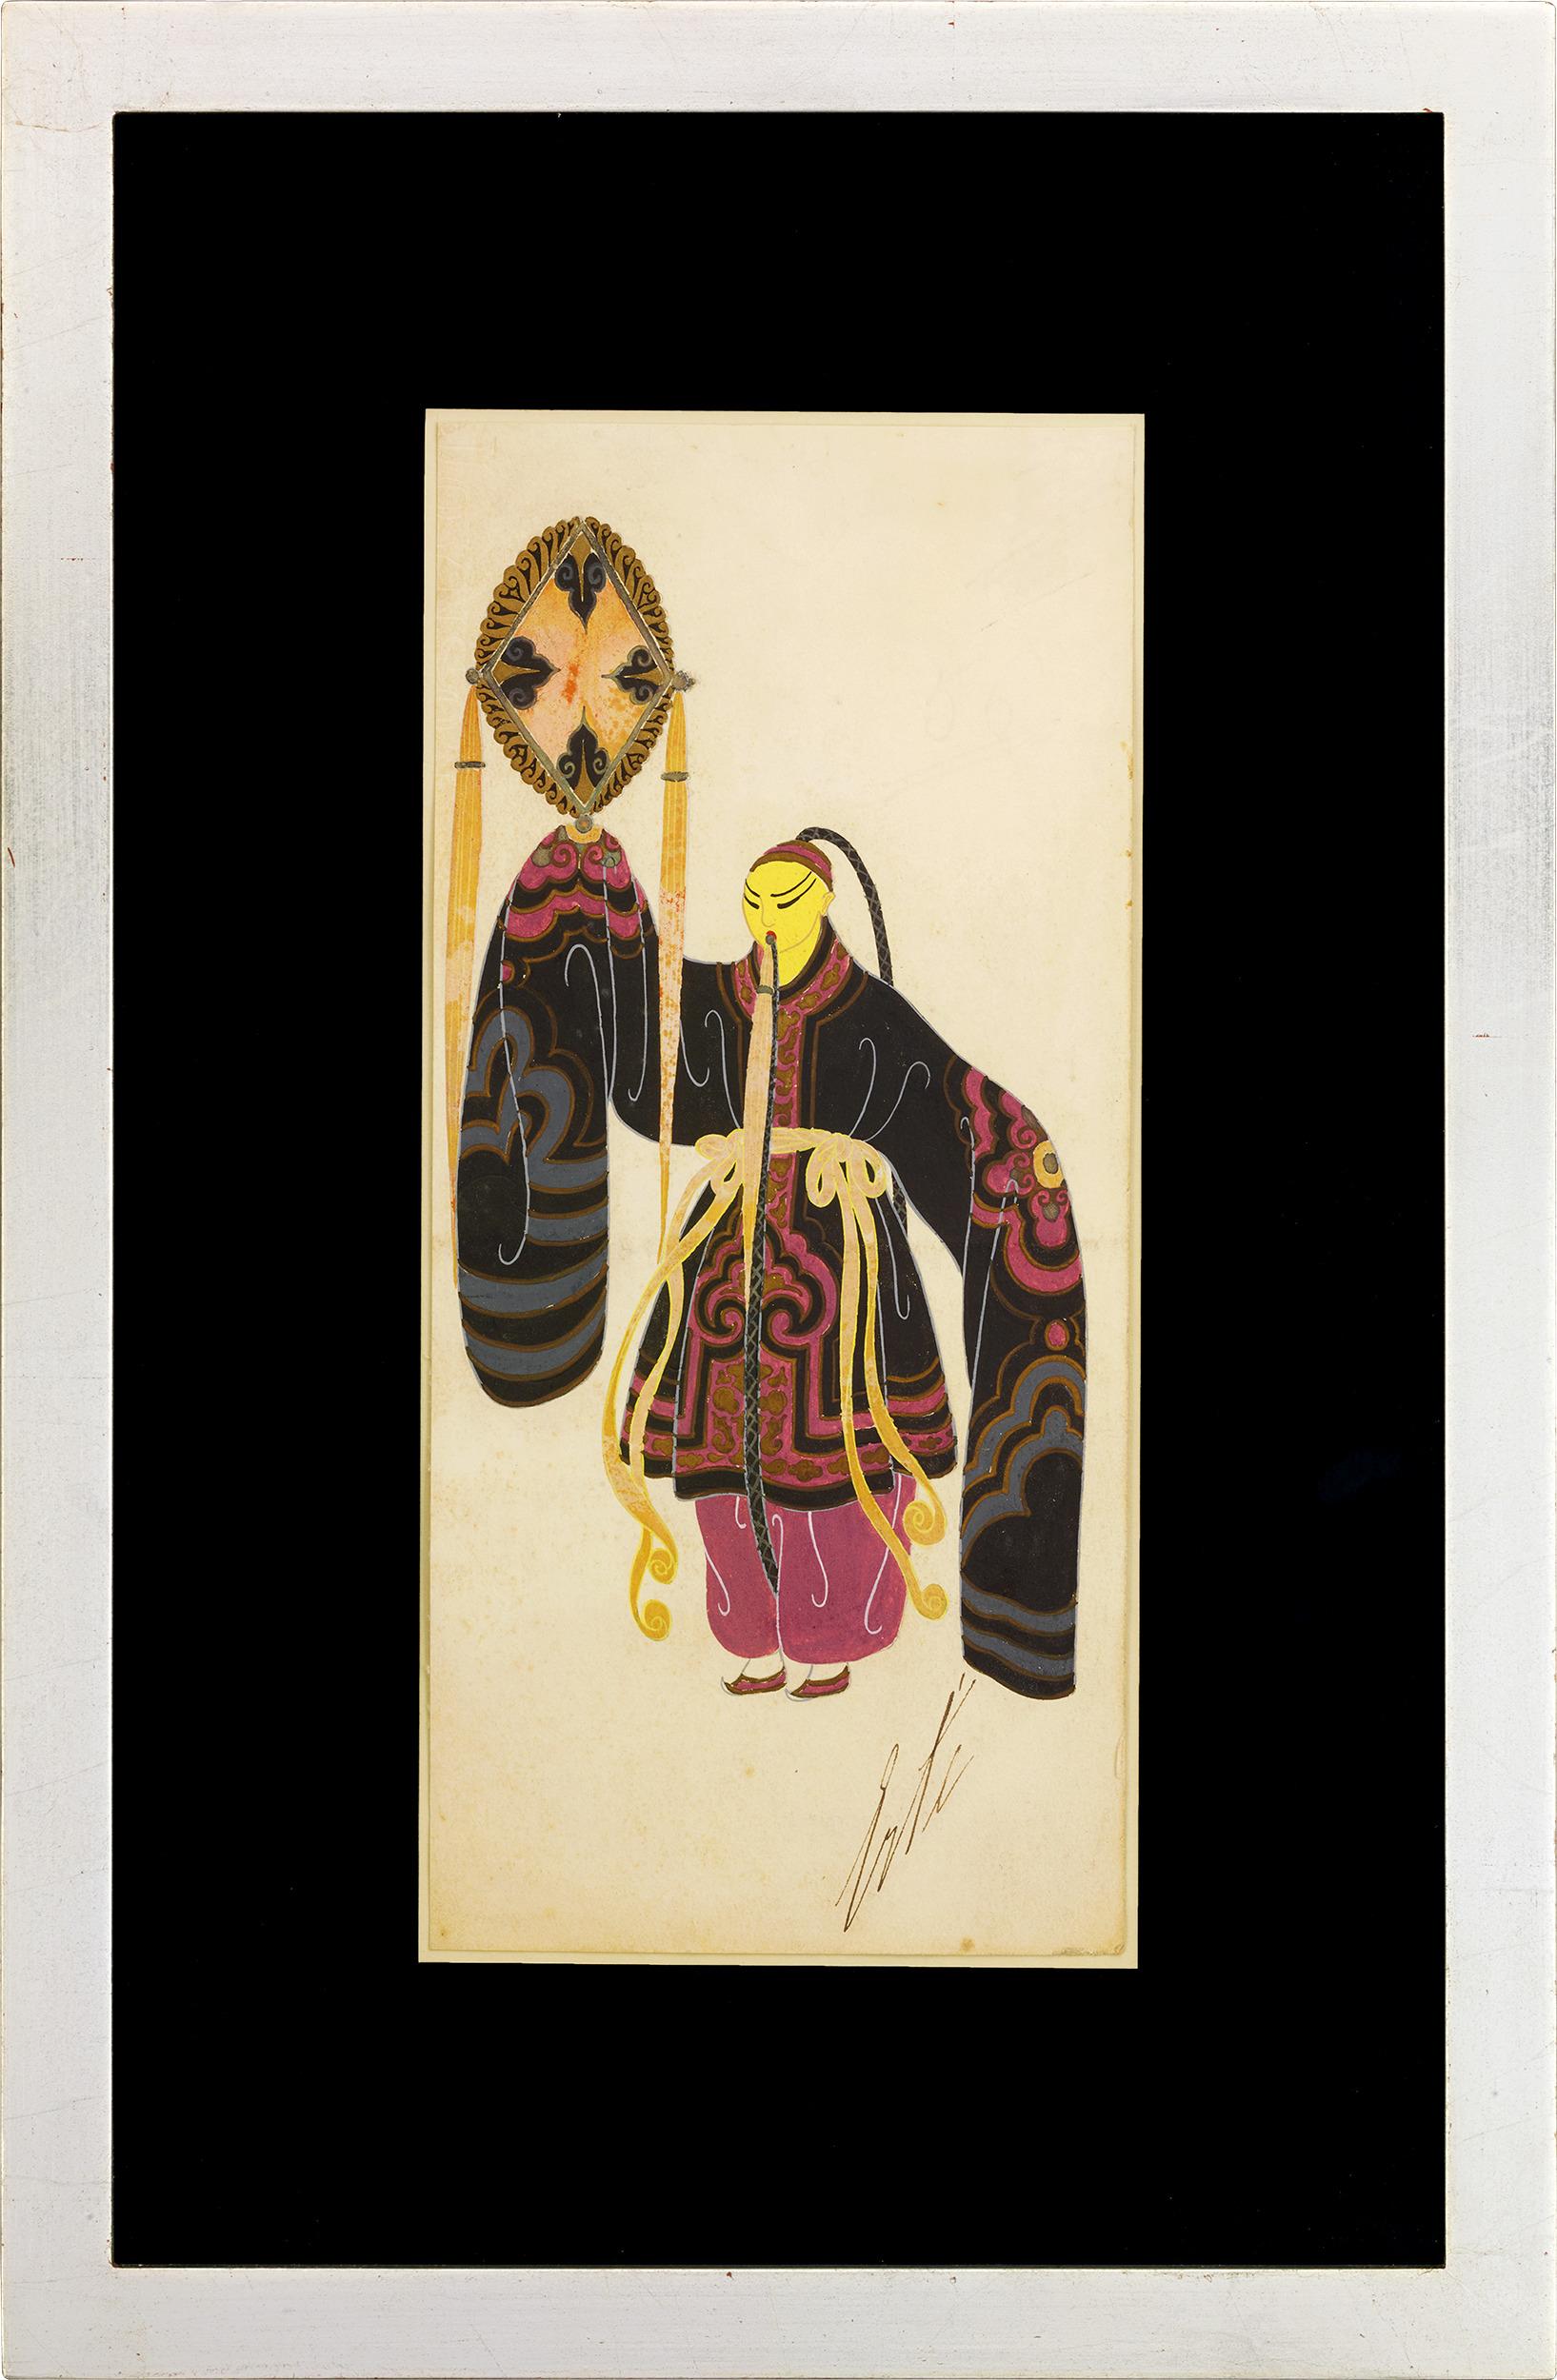 Erté (Romain de Tirtoff)
1892-1990 | Russian-French

Petit Chinois

Signed “Erté”(lower right)
Inscribed 